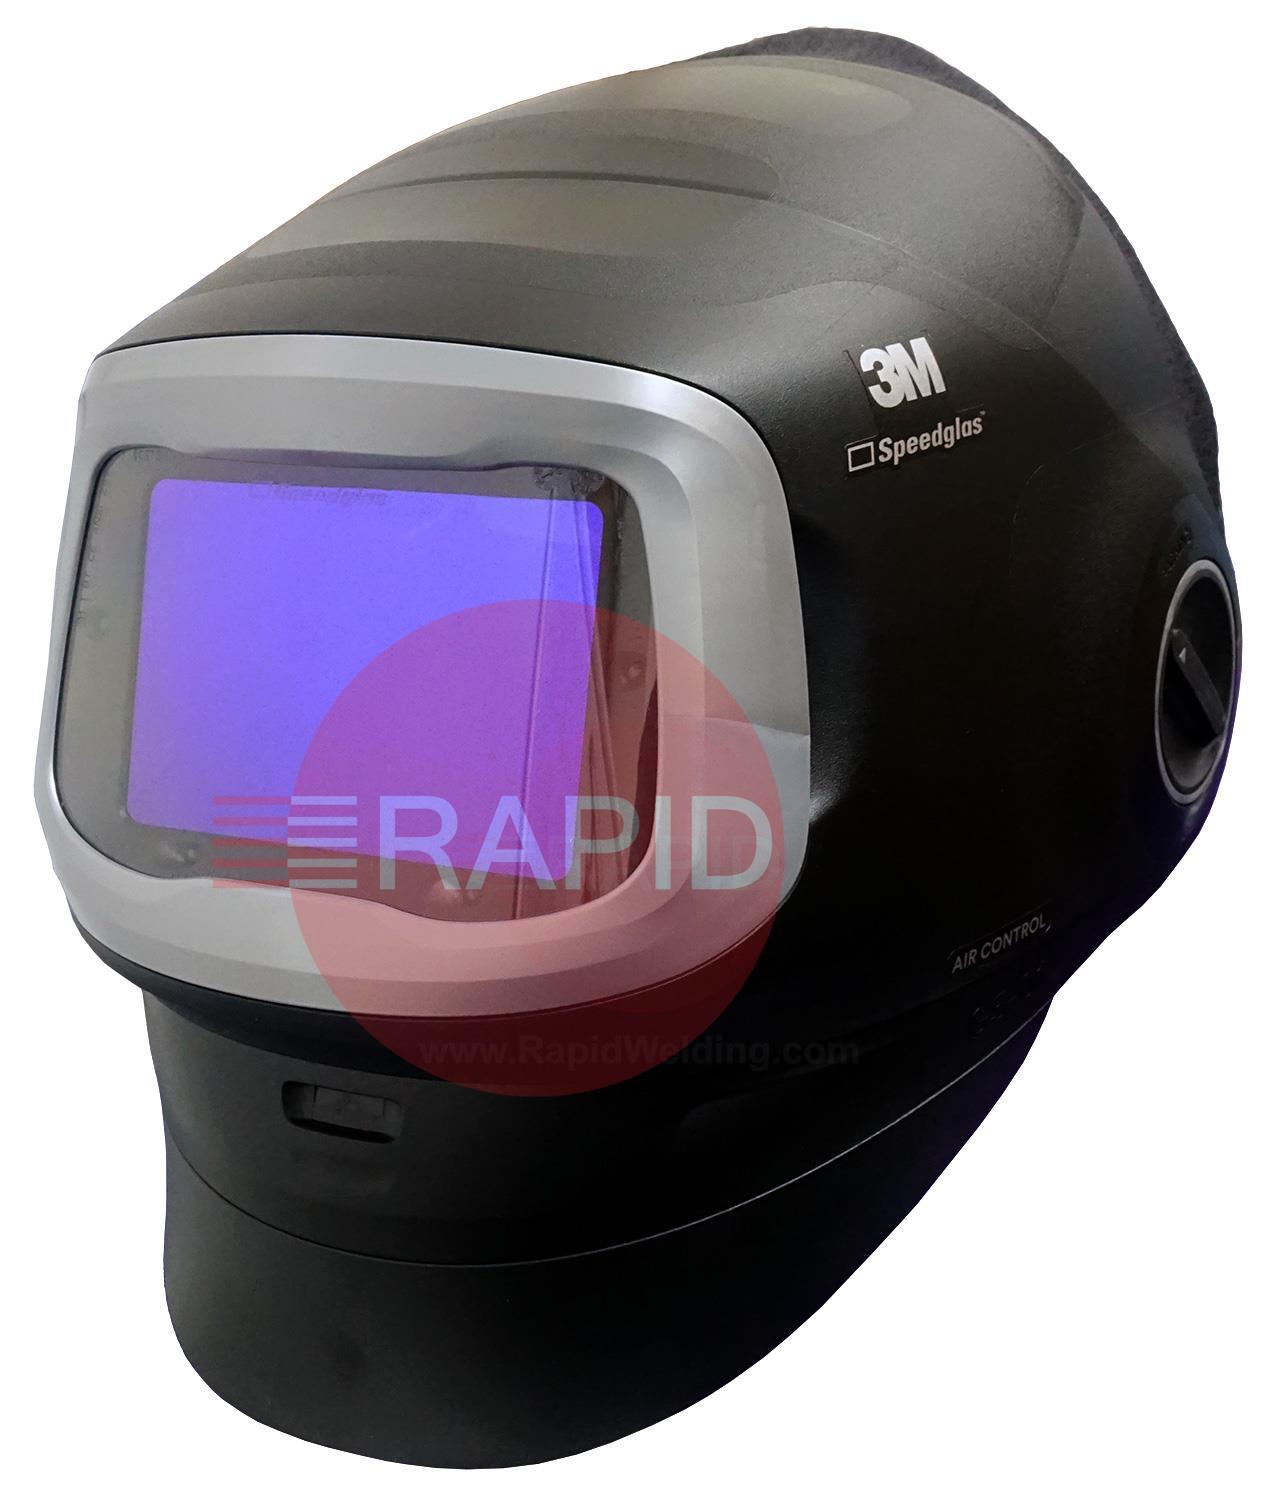 3M-611130  3M Speedglas G5-01 Welding Helmet with G5-01VC Variable Colour Filter, with Air Duct for Adflo